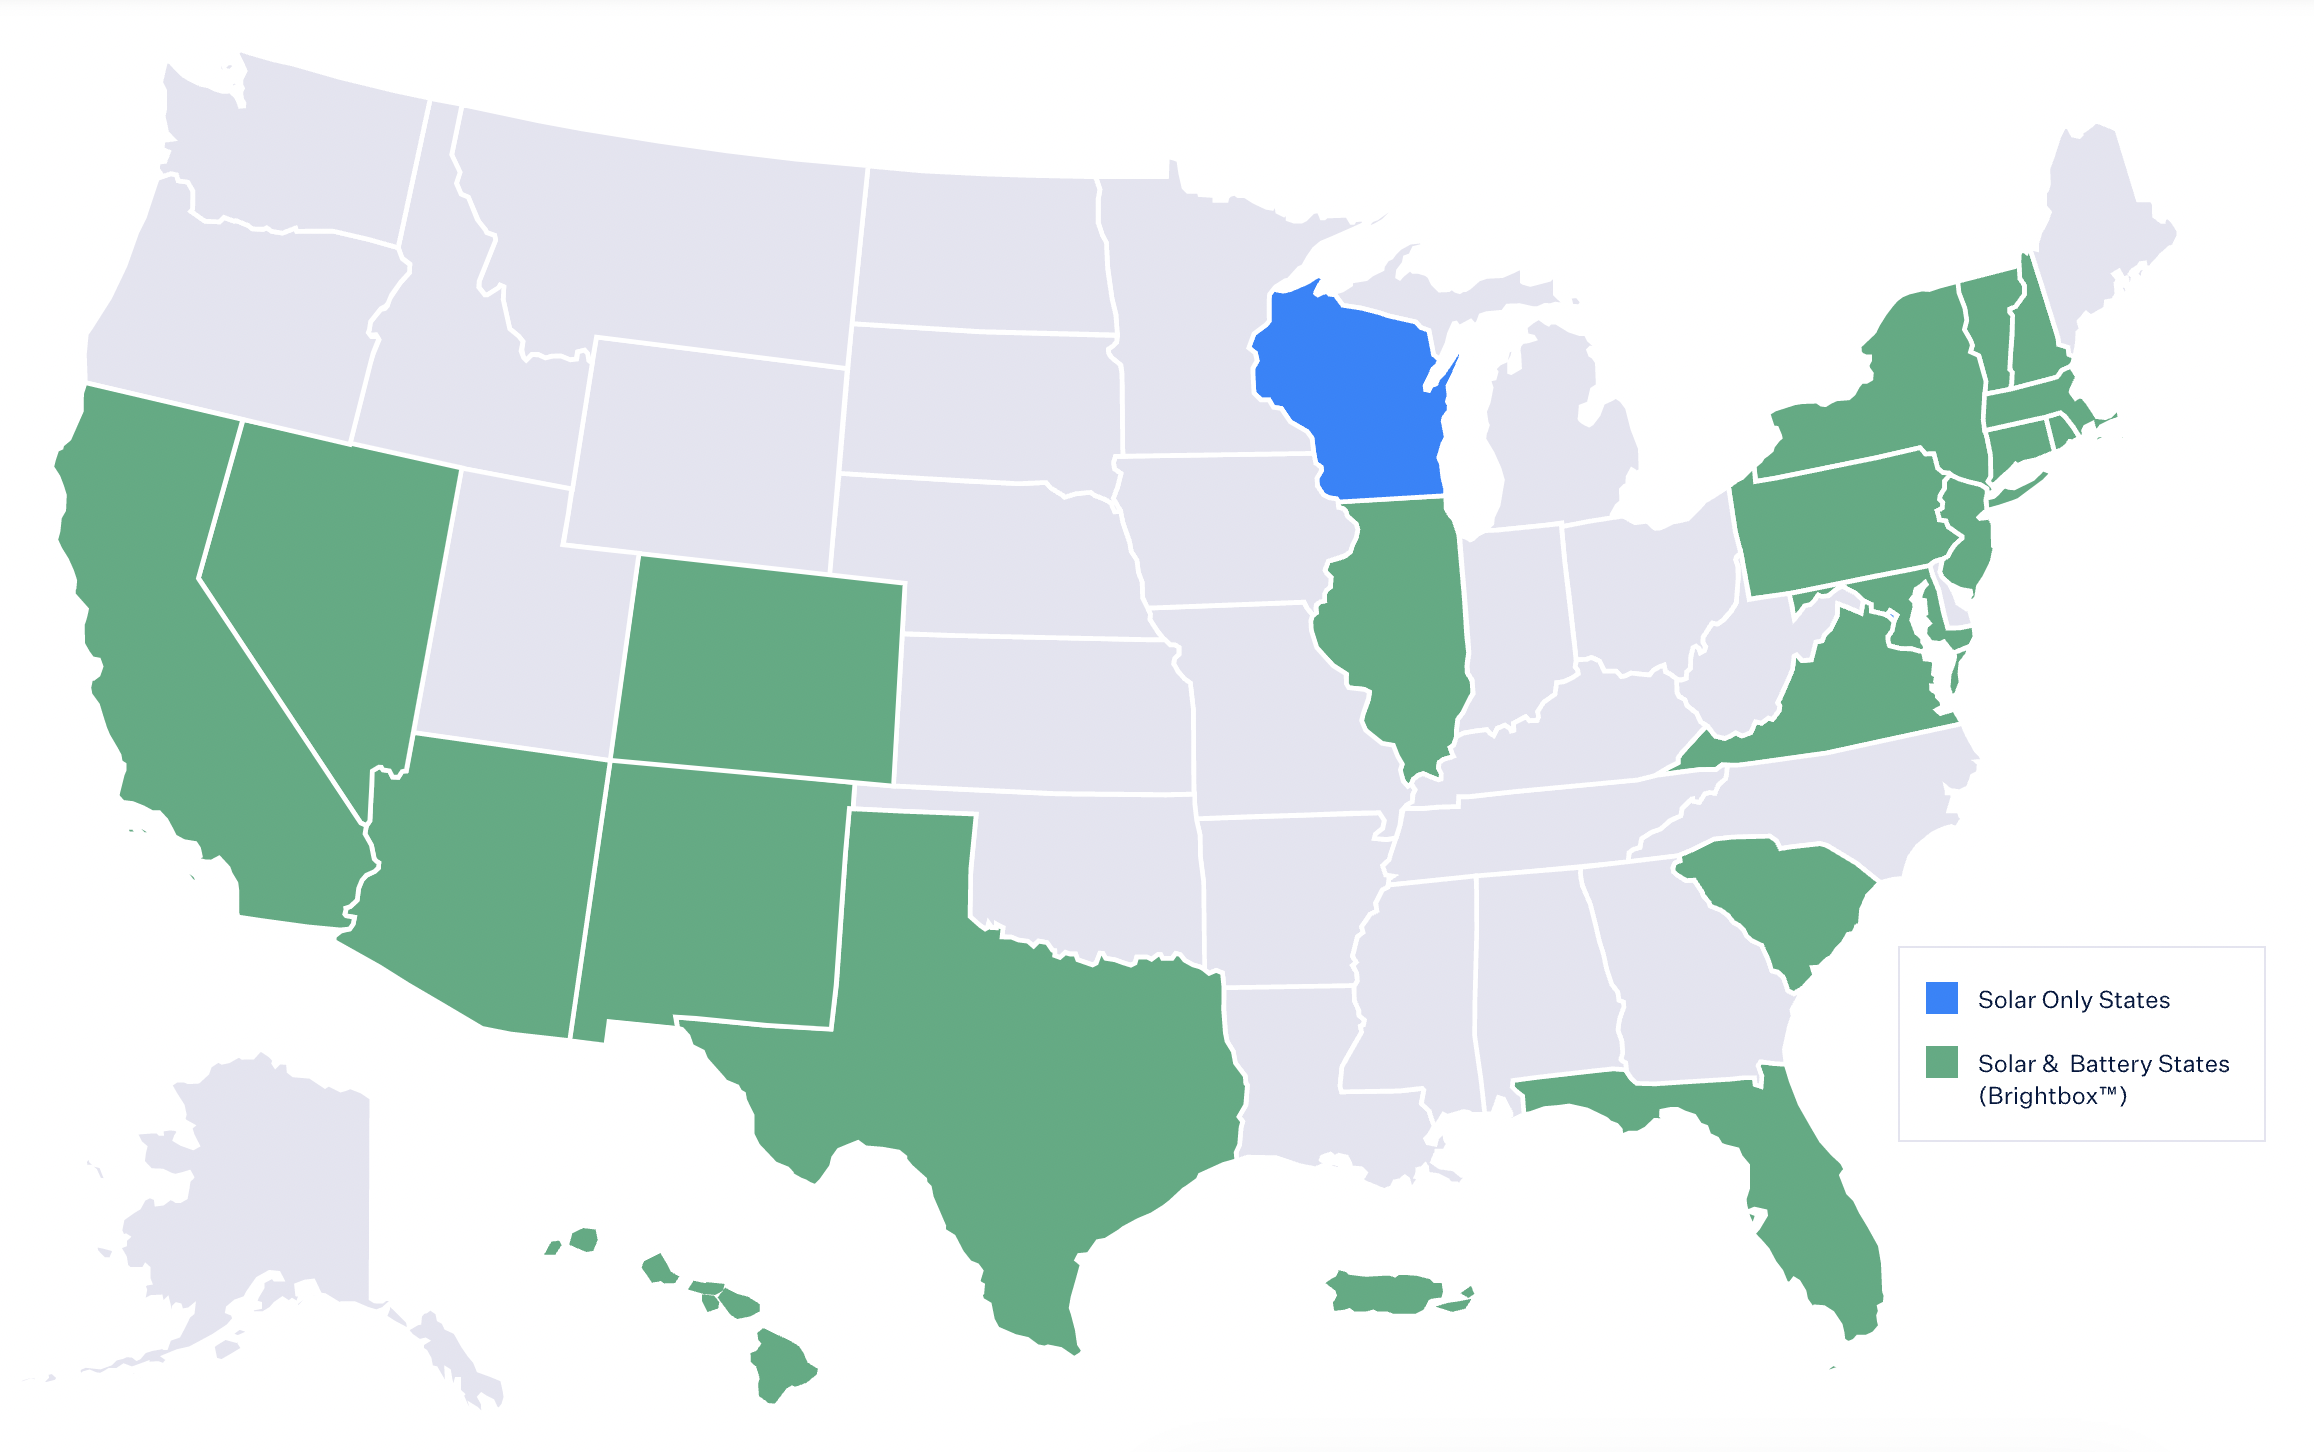 Solar and Brightbox by state